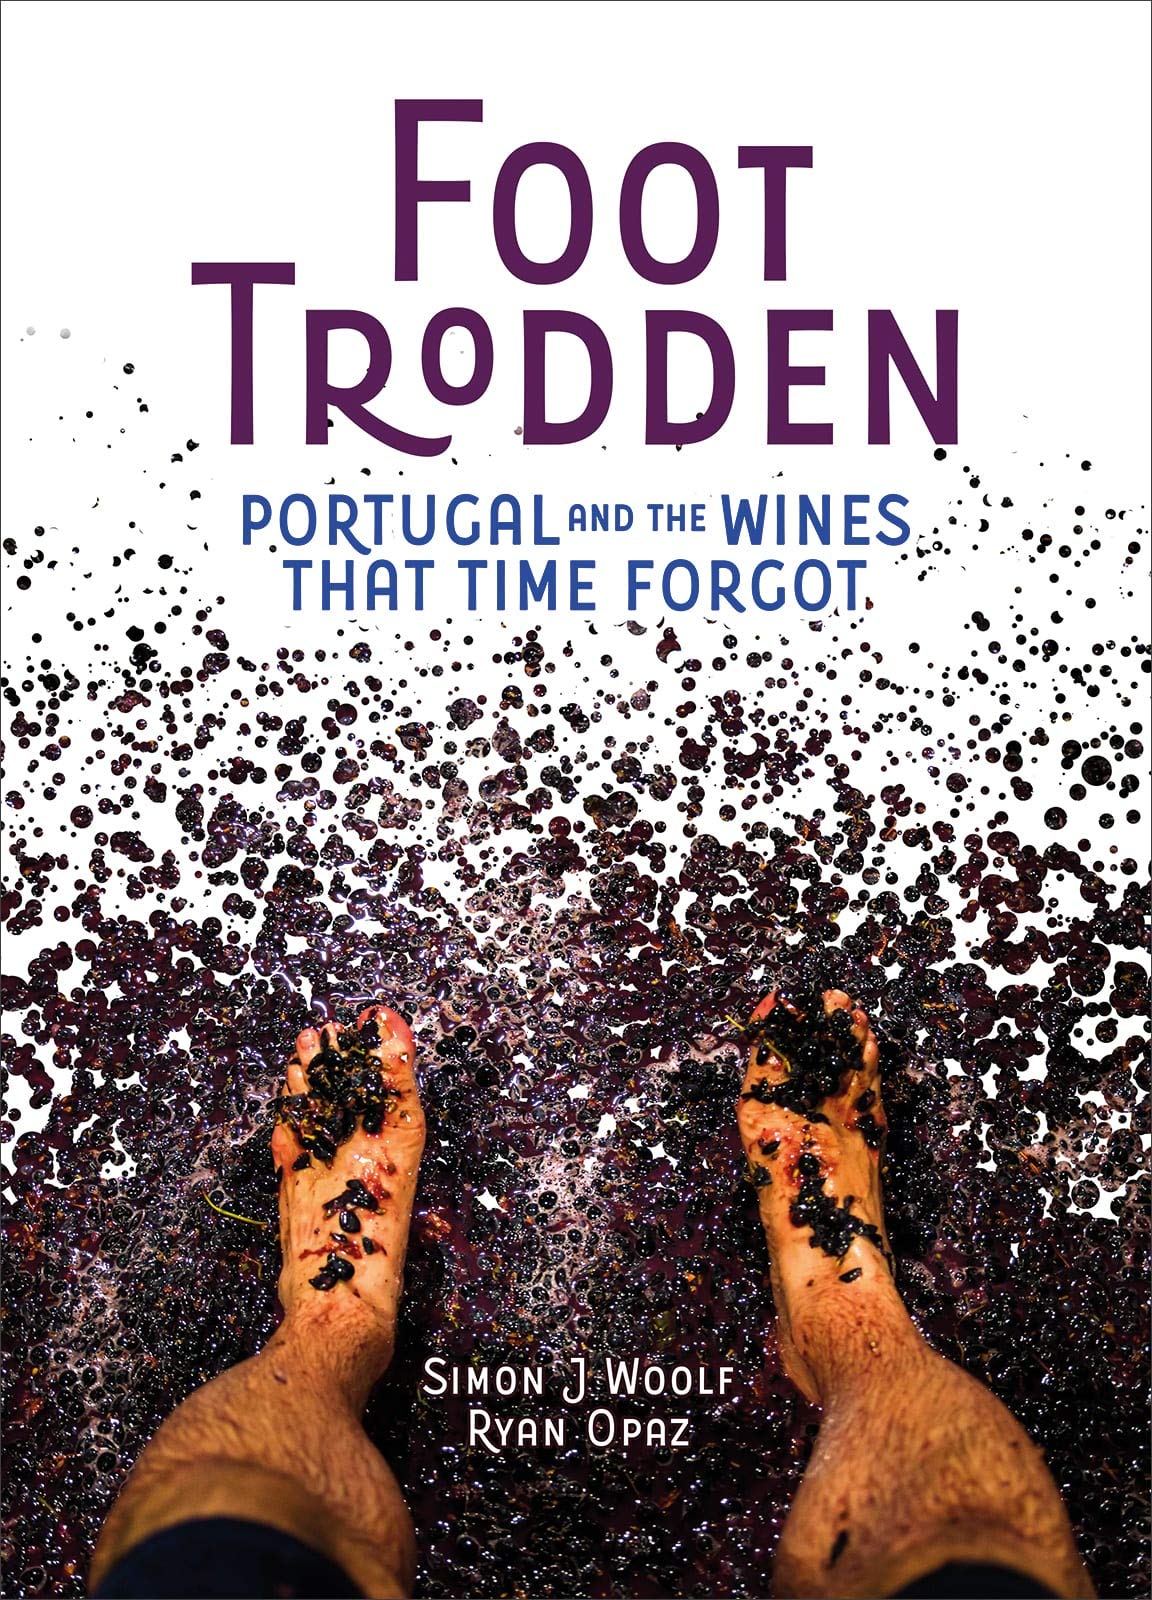 Foot Trodden: Portugal and the Wines that Time Forgot (Simon J. Woolf, Ryan Opaz) *Signed*